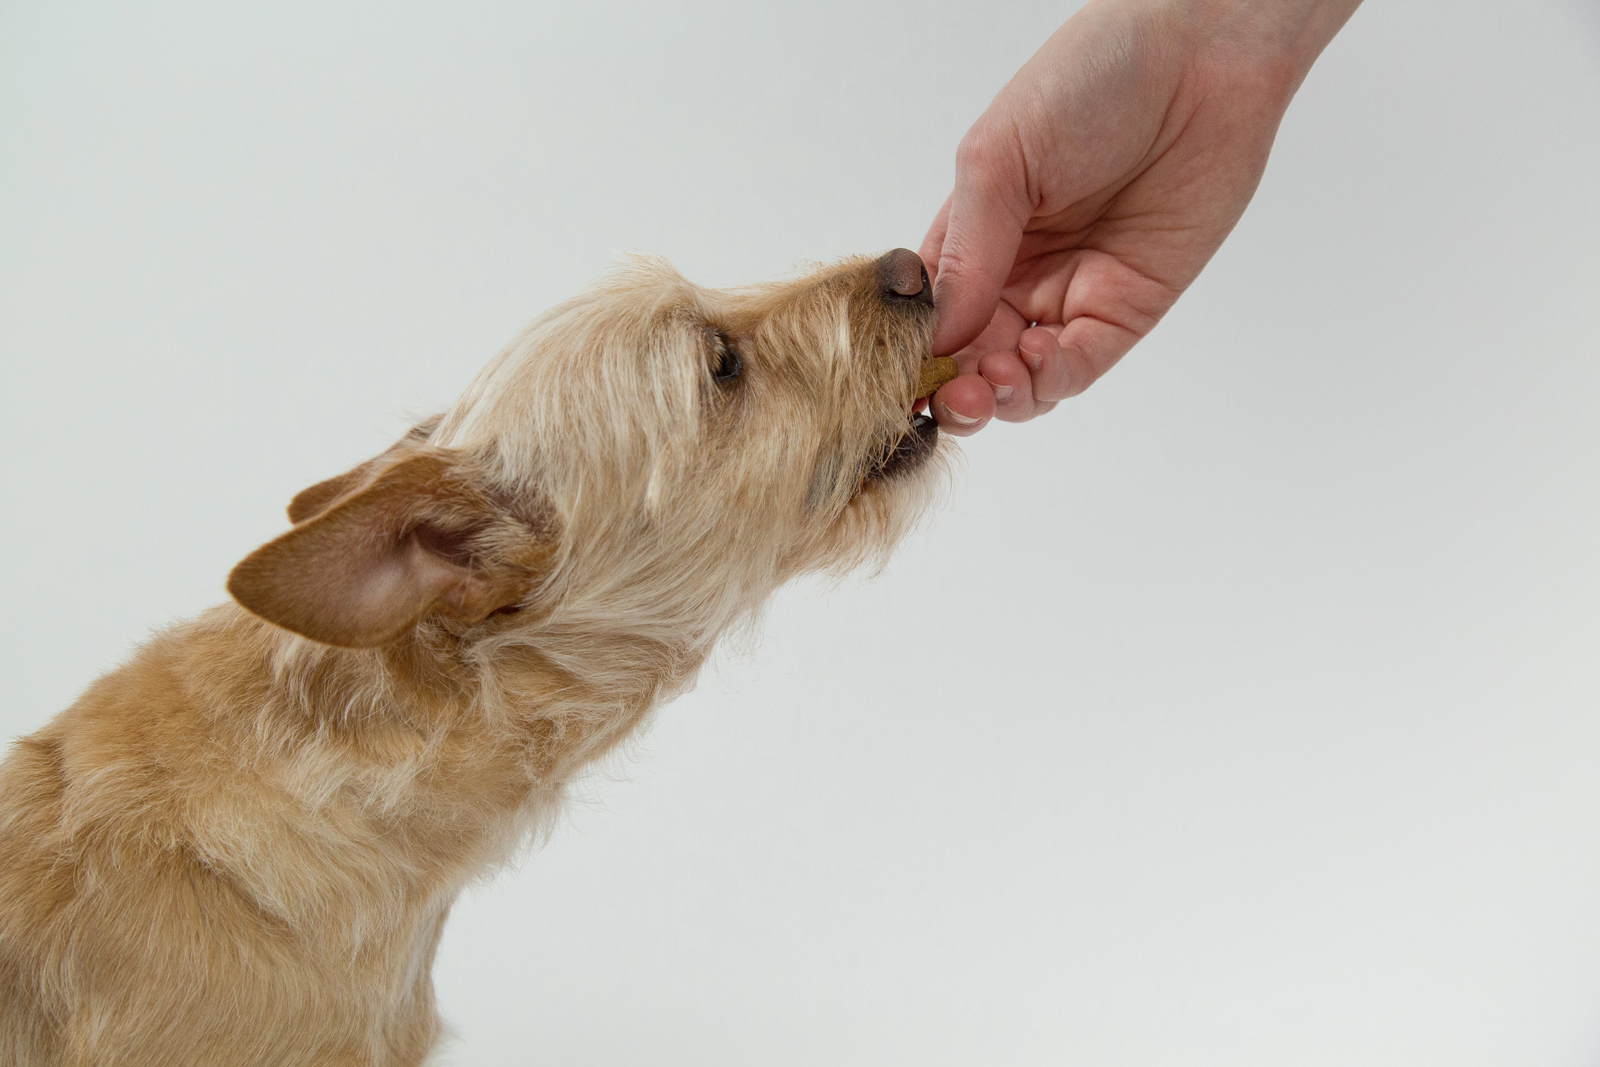 An owner giving a dog a treat